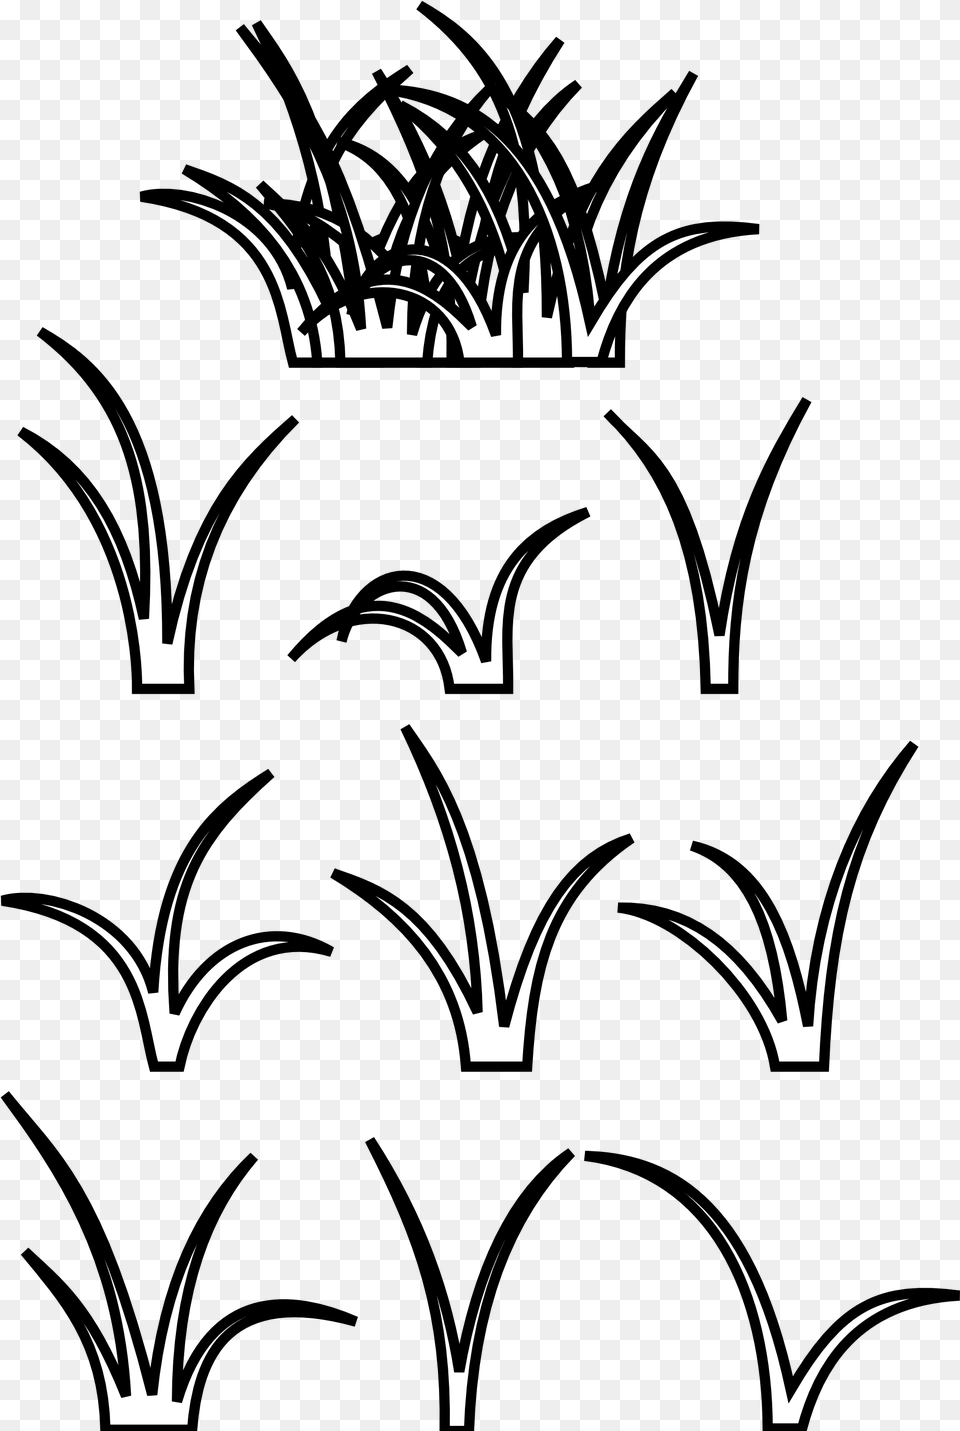 Line Drawing At Getdrawings Patches Of Grass Drawing, Stencil, Symbol, Logo, Batman Logo Png